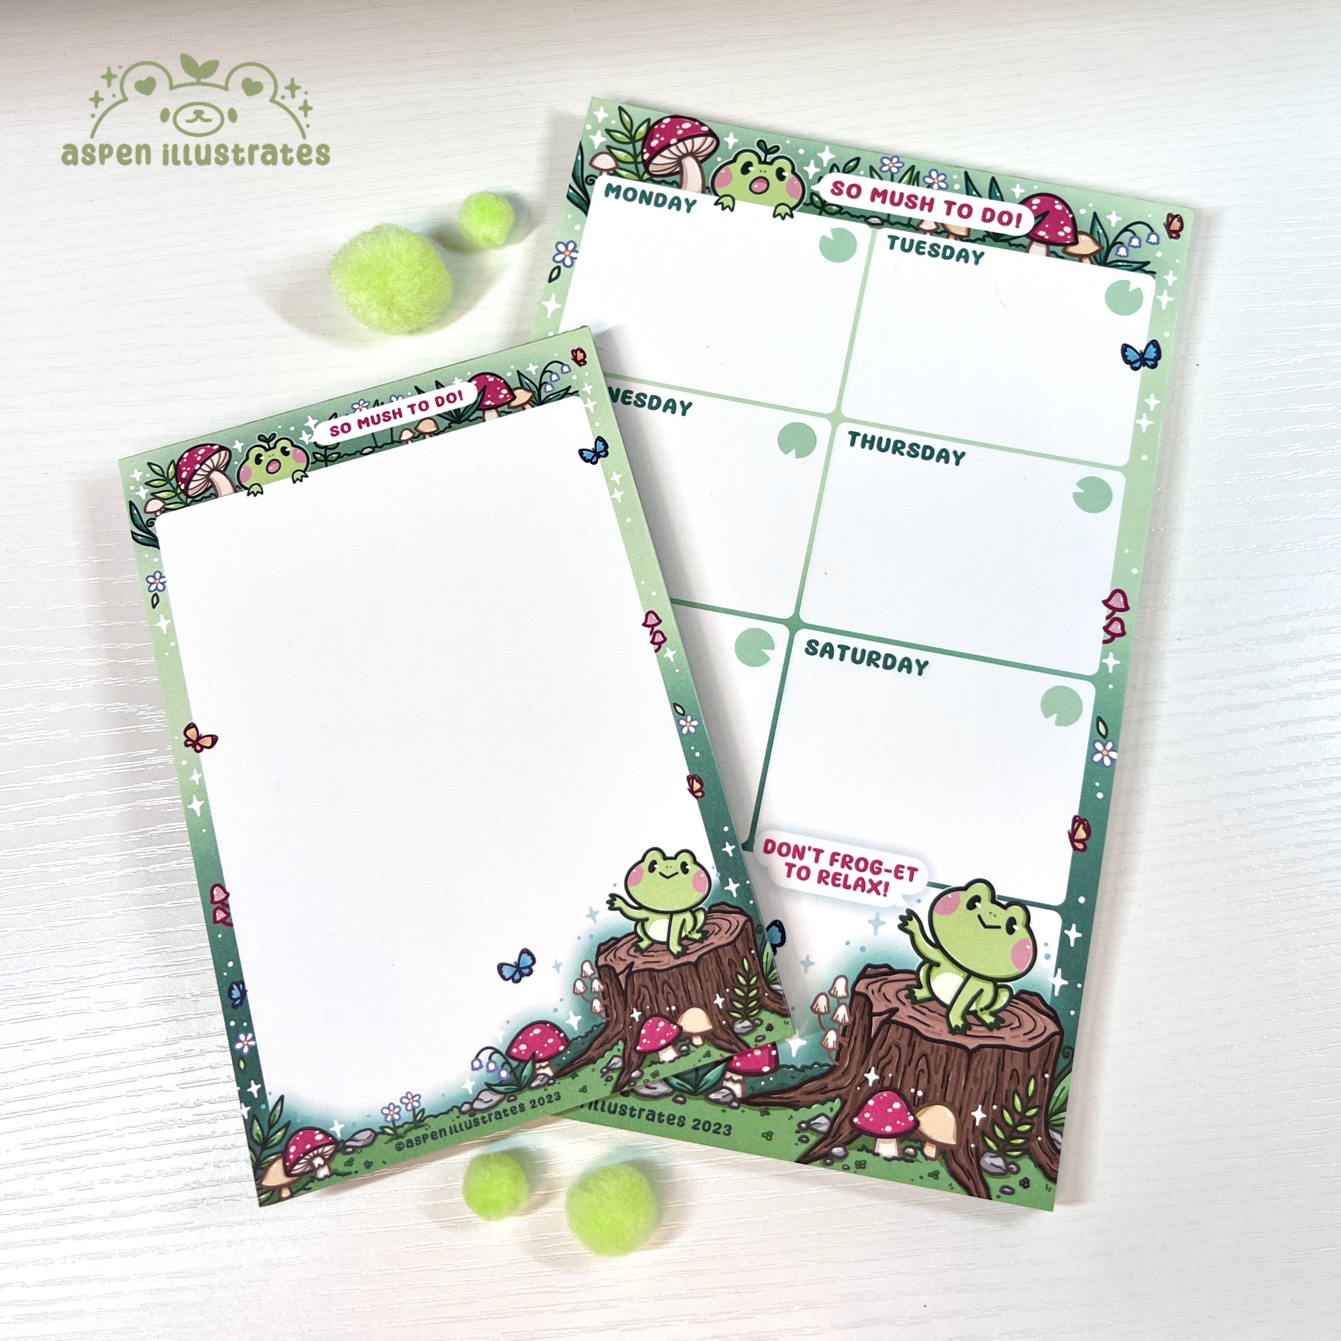 “So Mush to Do” Froggy Notepad & Weekly Planner